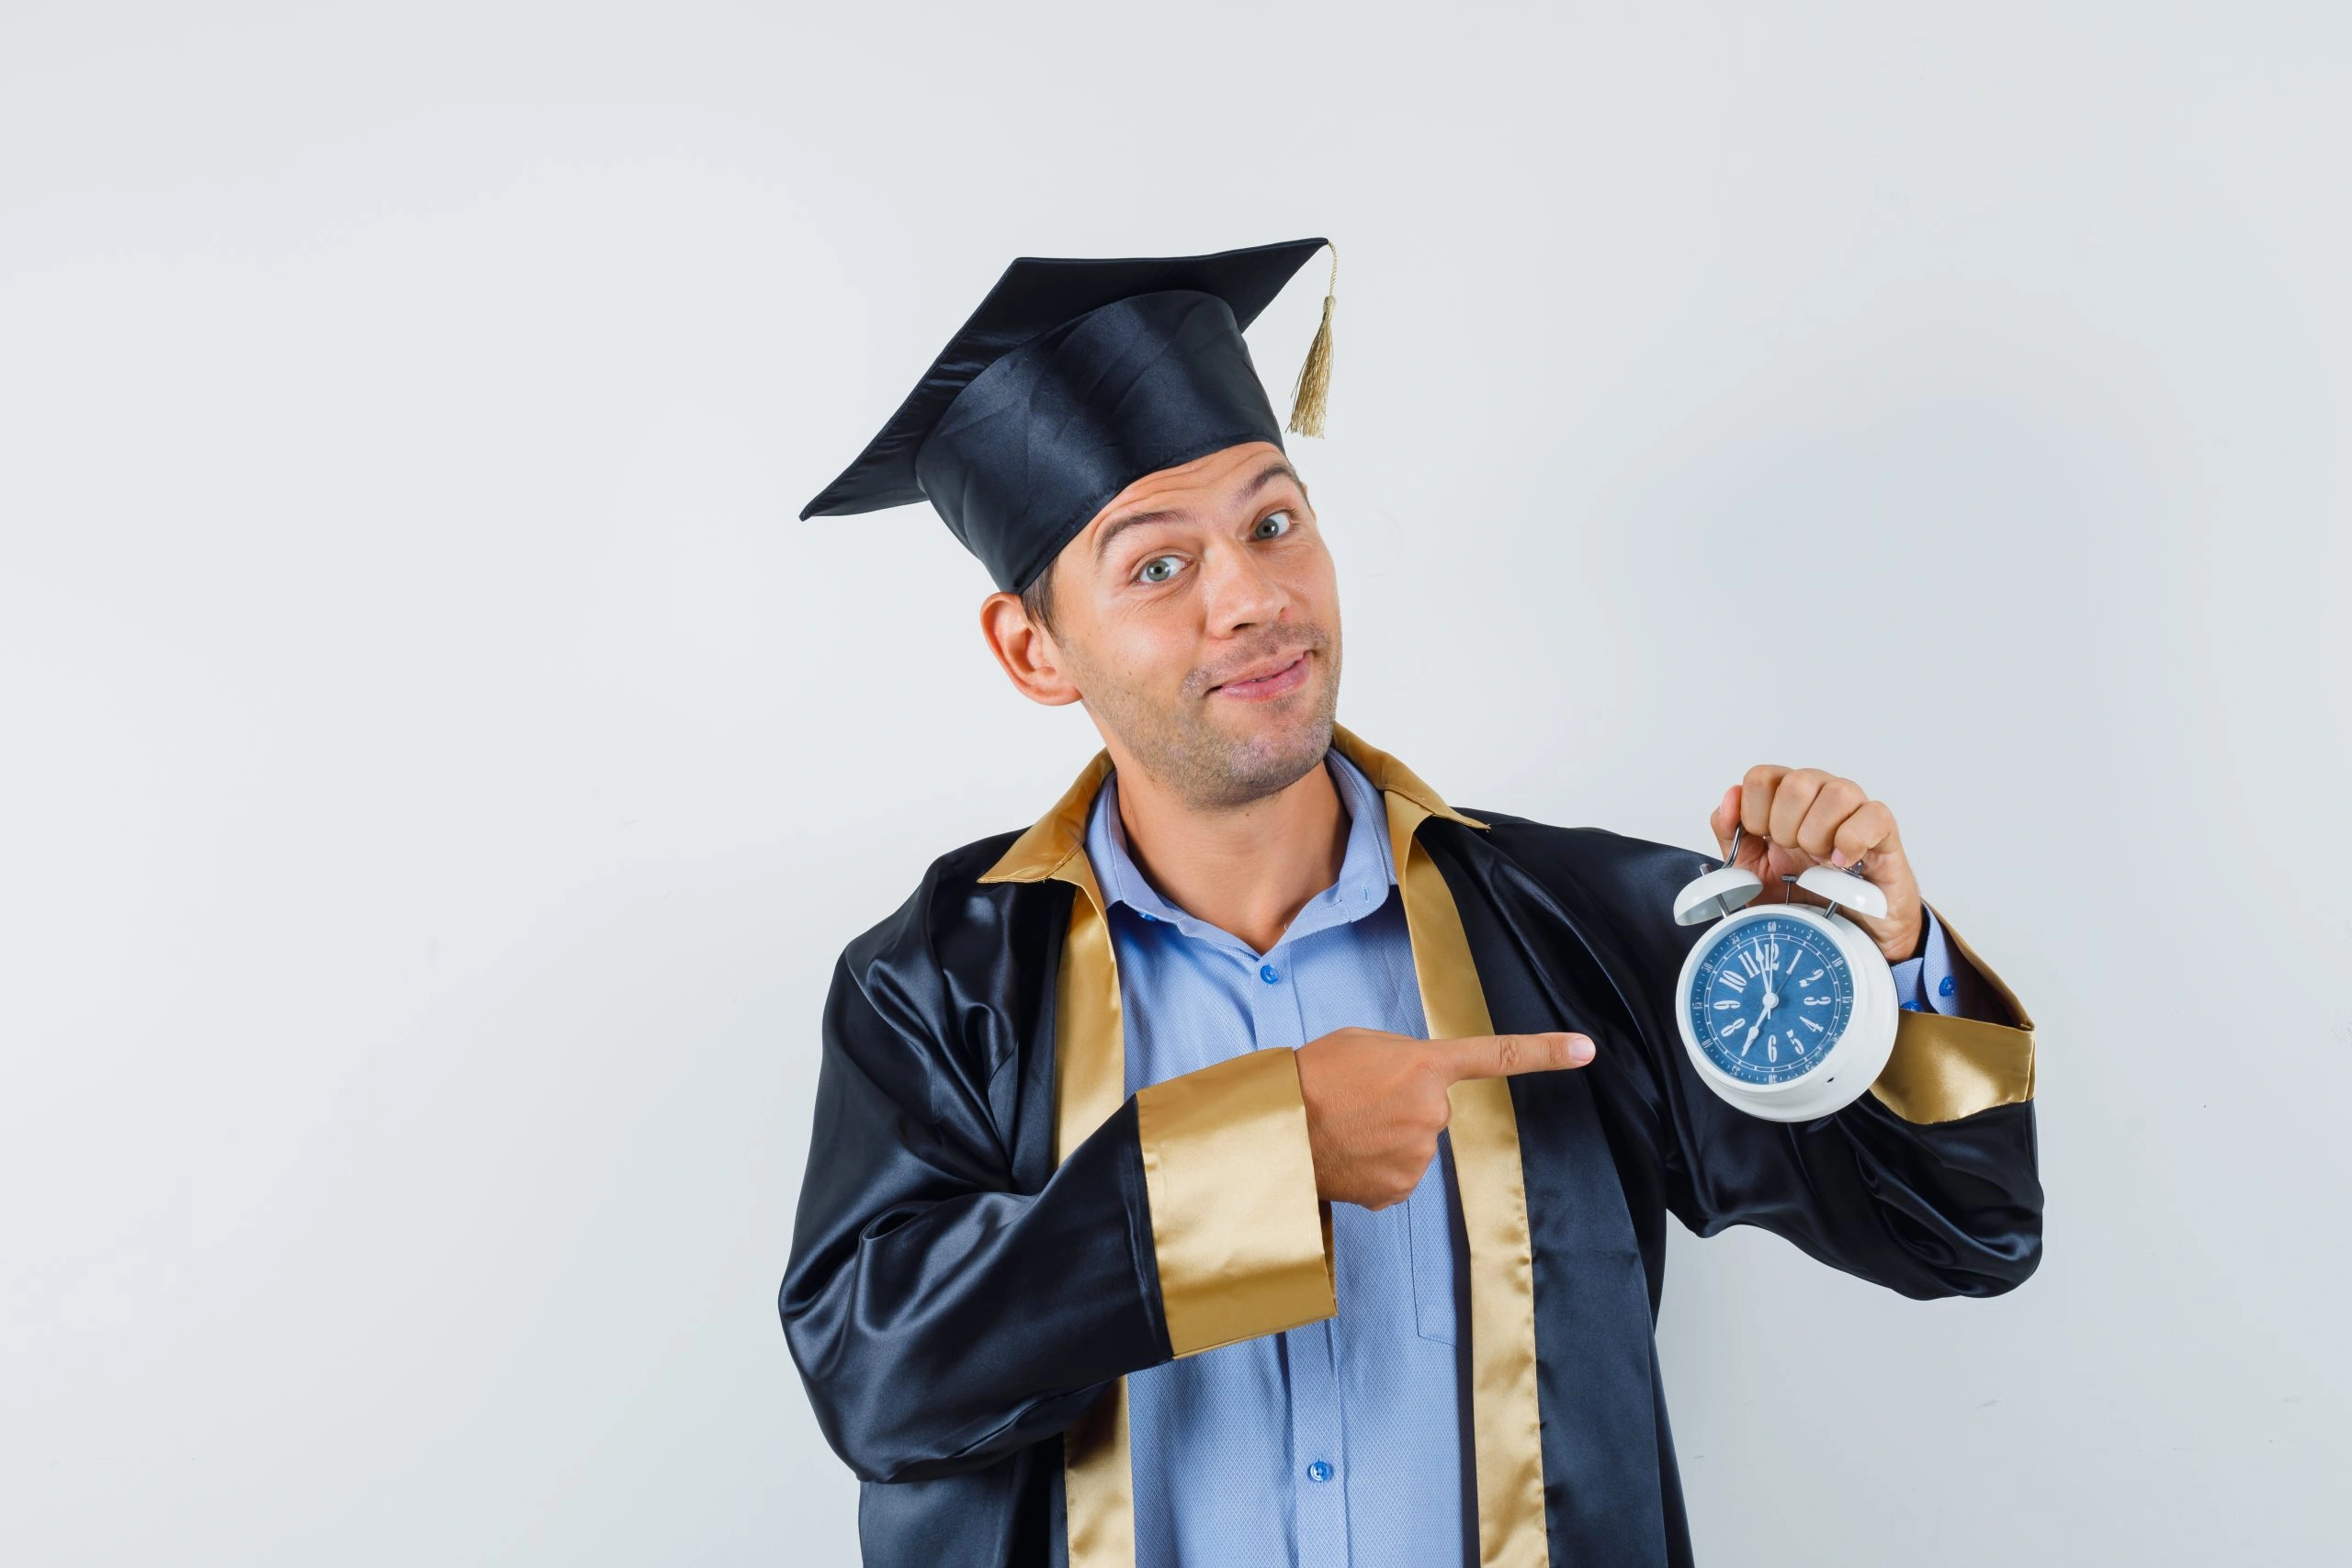 Master's Degree: After Graduation or After Work?